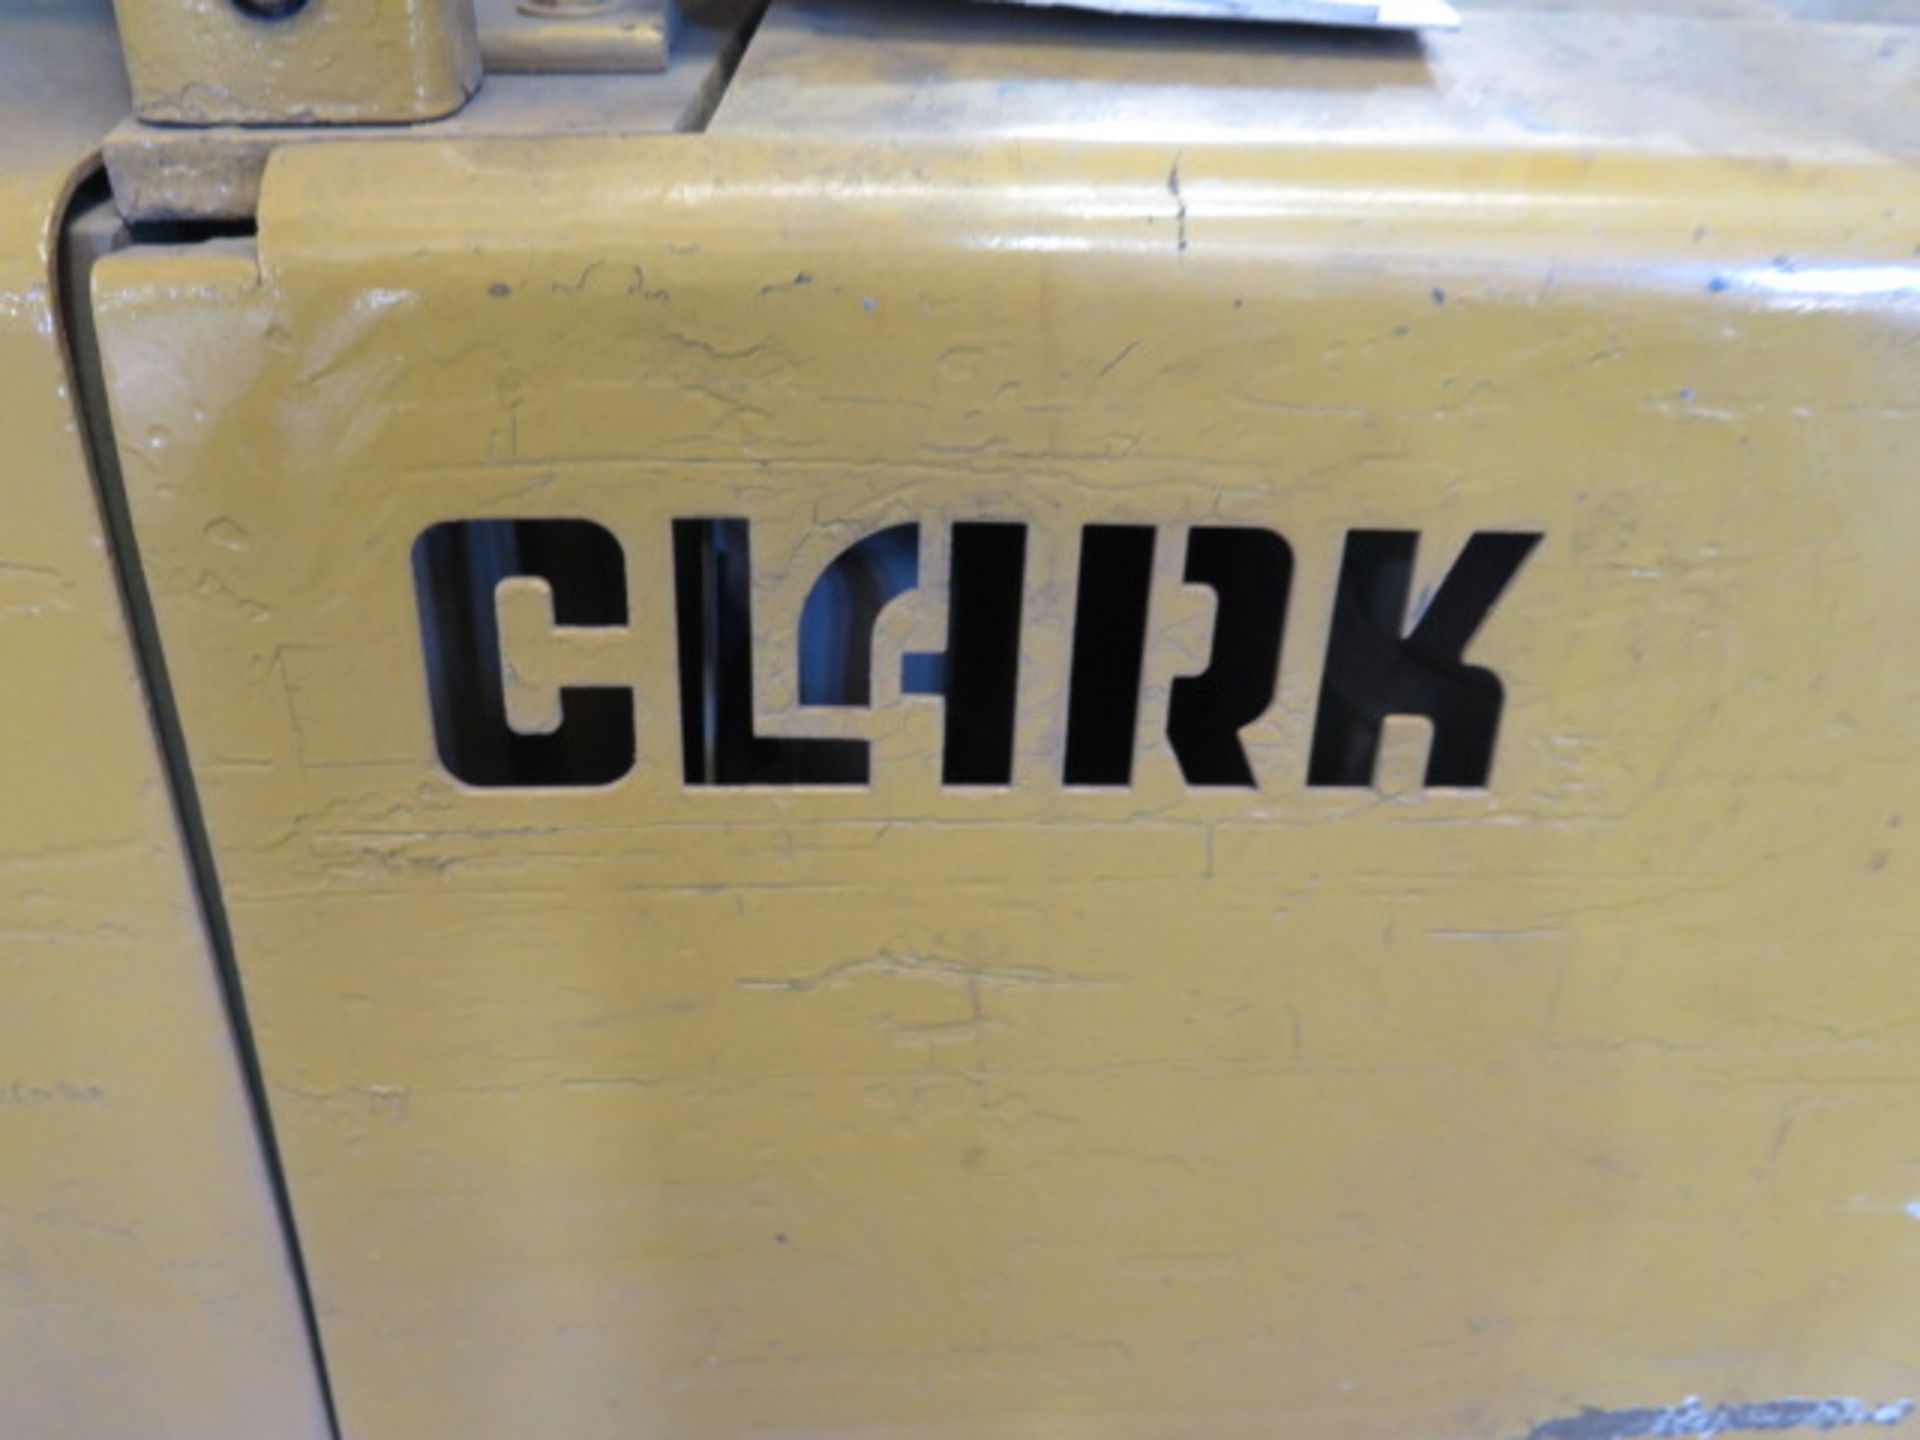 Clark C500-80 7250 Lb Cap LPG Forklift s/n 685-285-22511072 w/ 3-Stage, 180" Lift Height, SOLD AS IS - Image 13 of 13